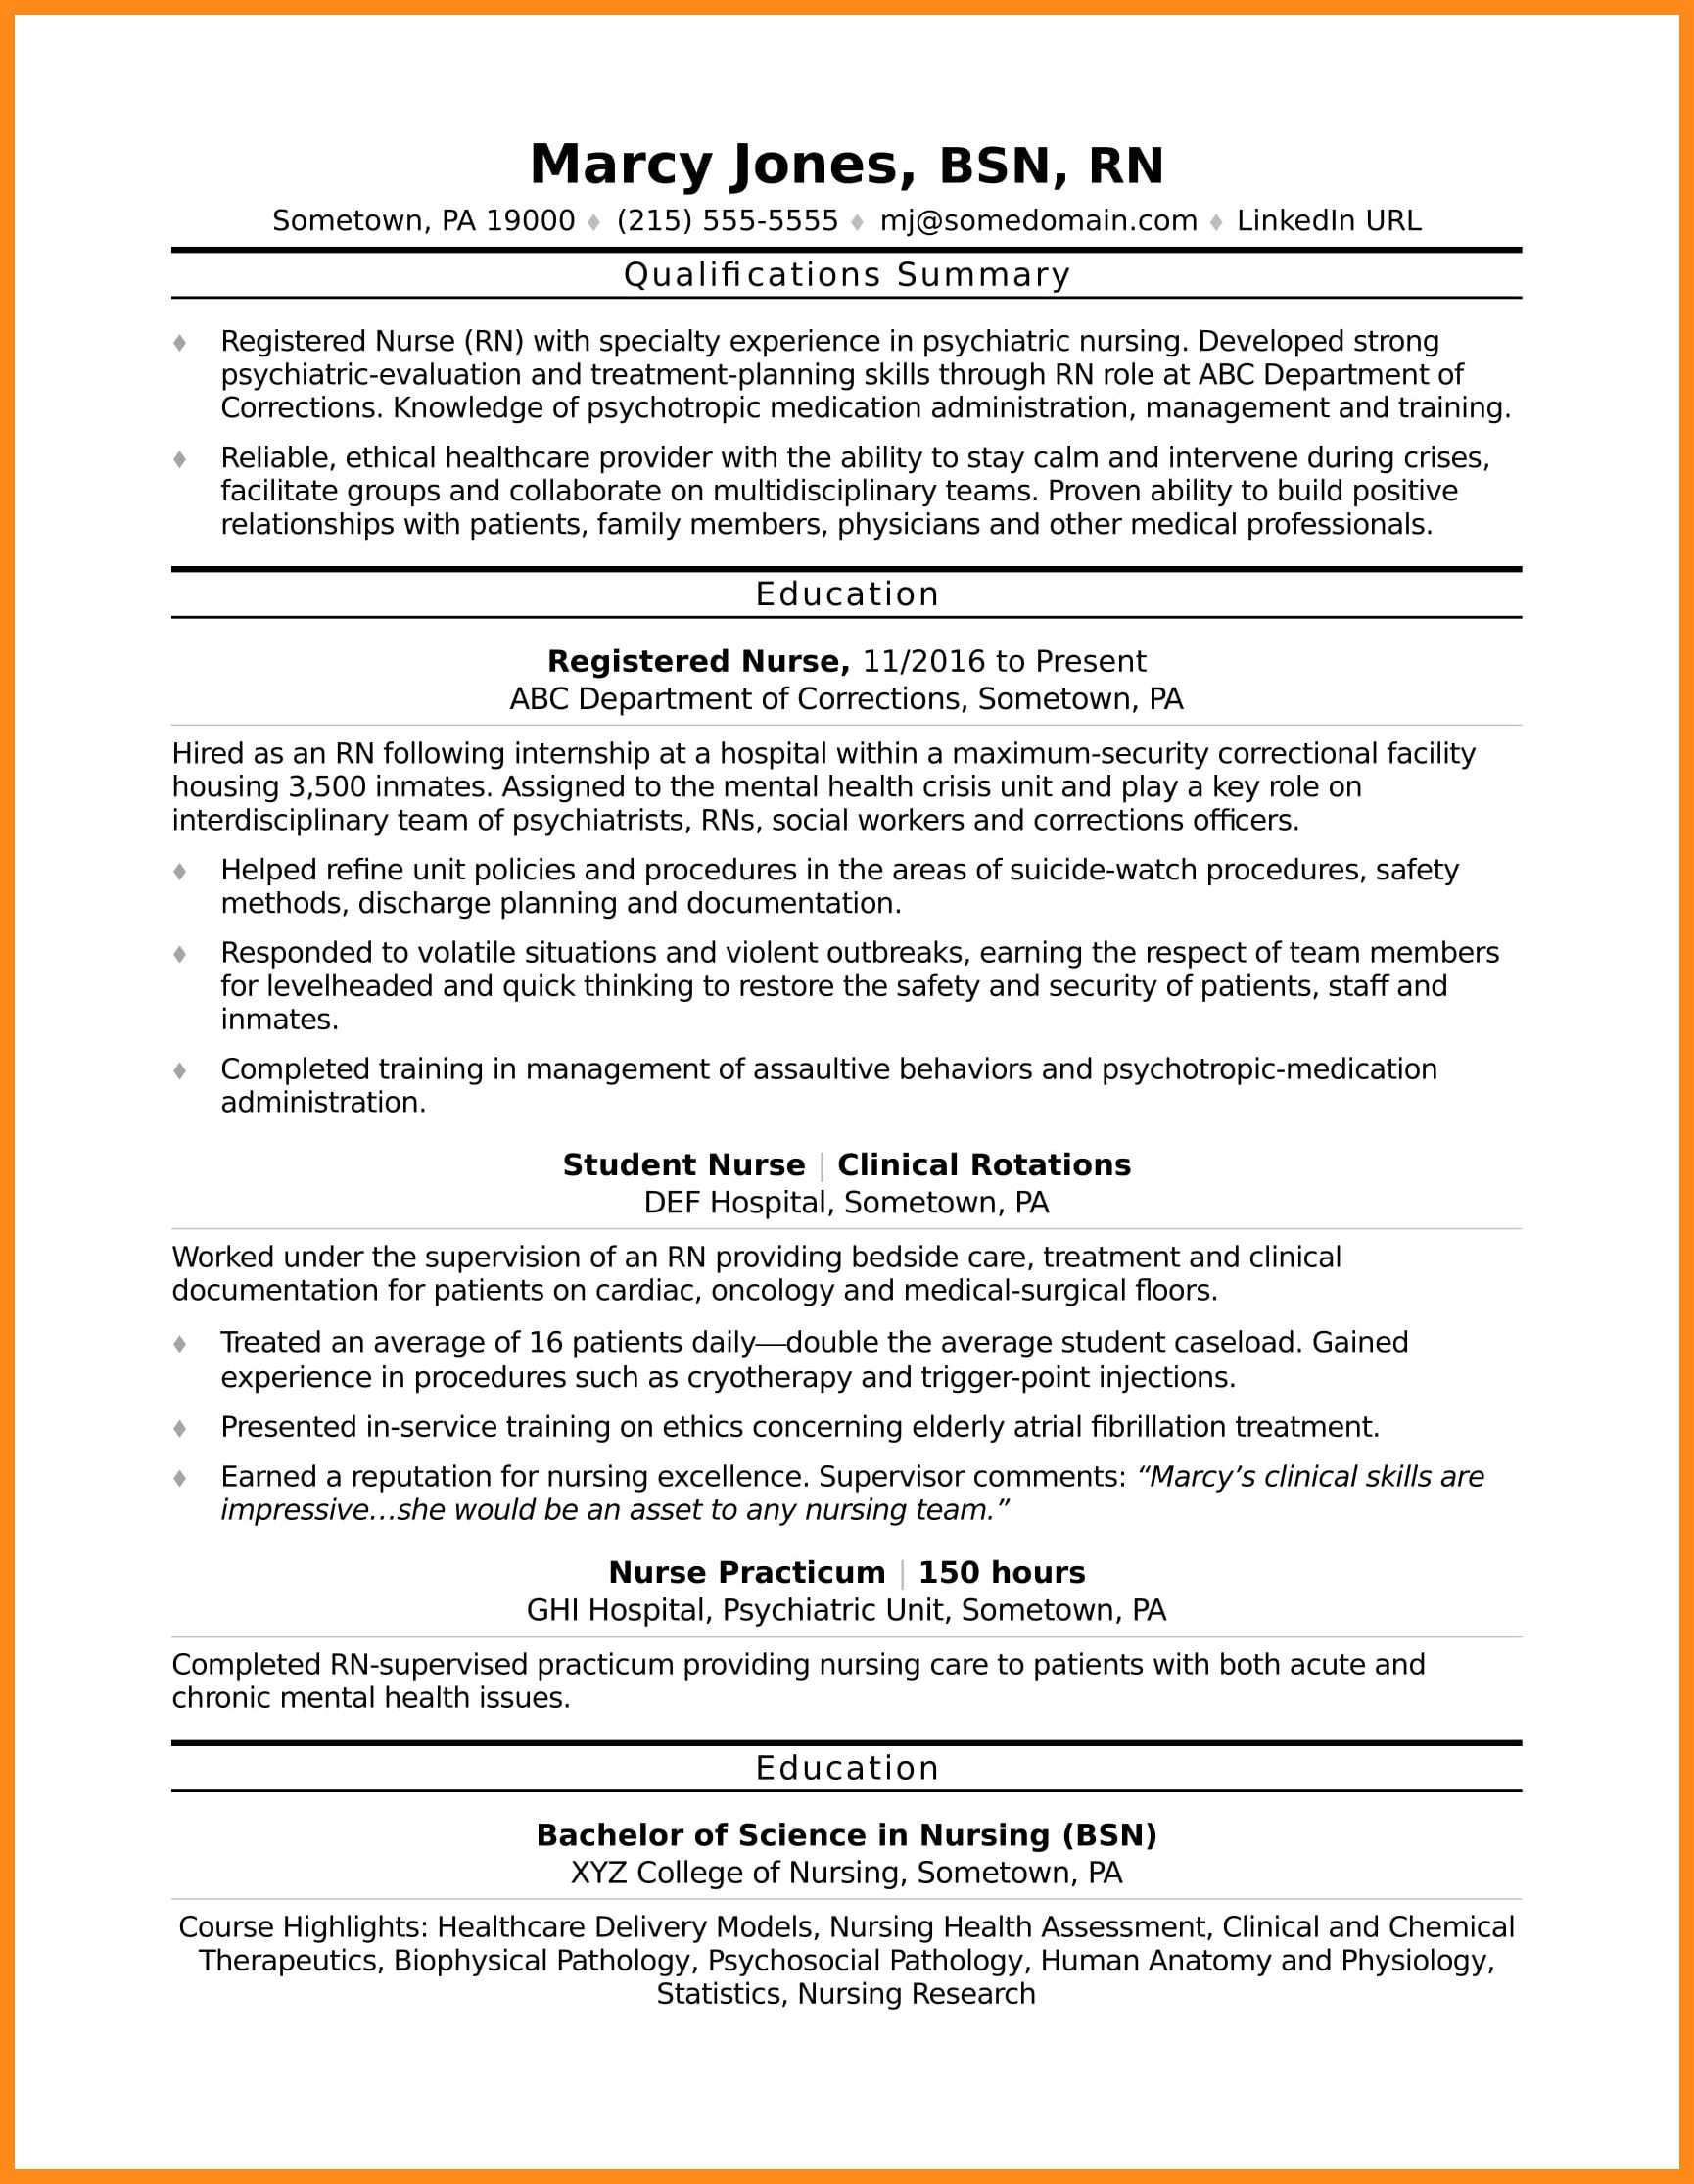 Sample Resume for Nurses with No Experience 11 12 Nursing Resume without Experience